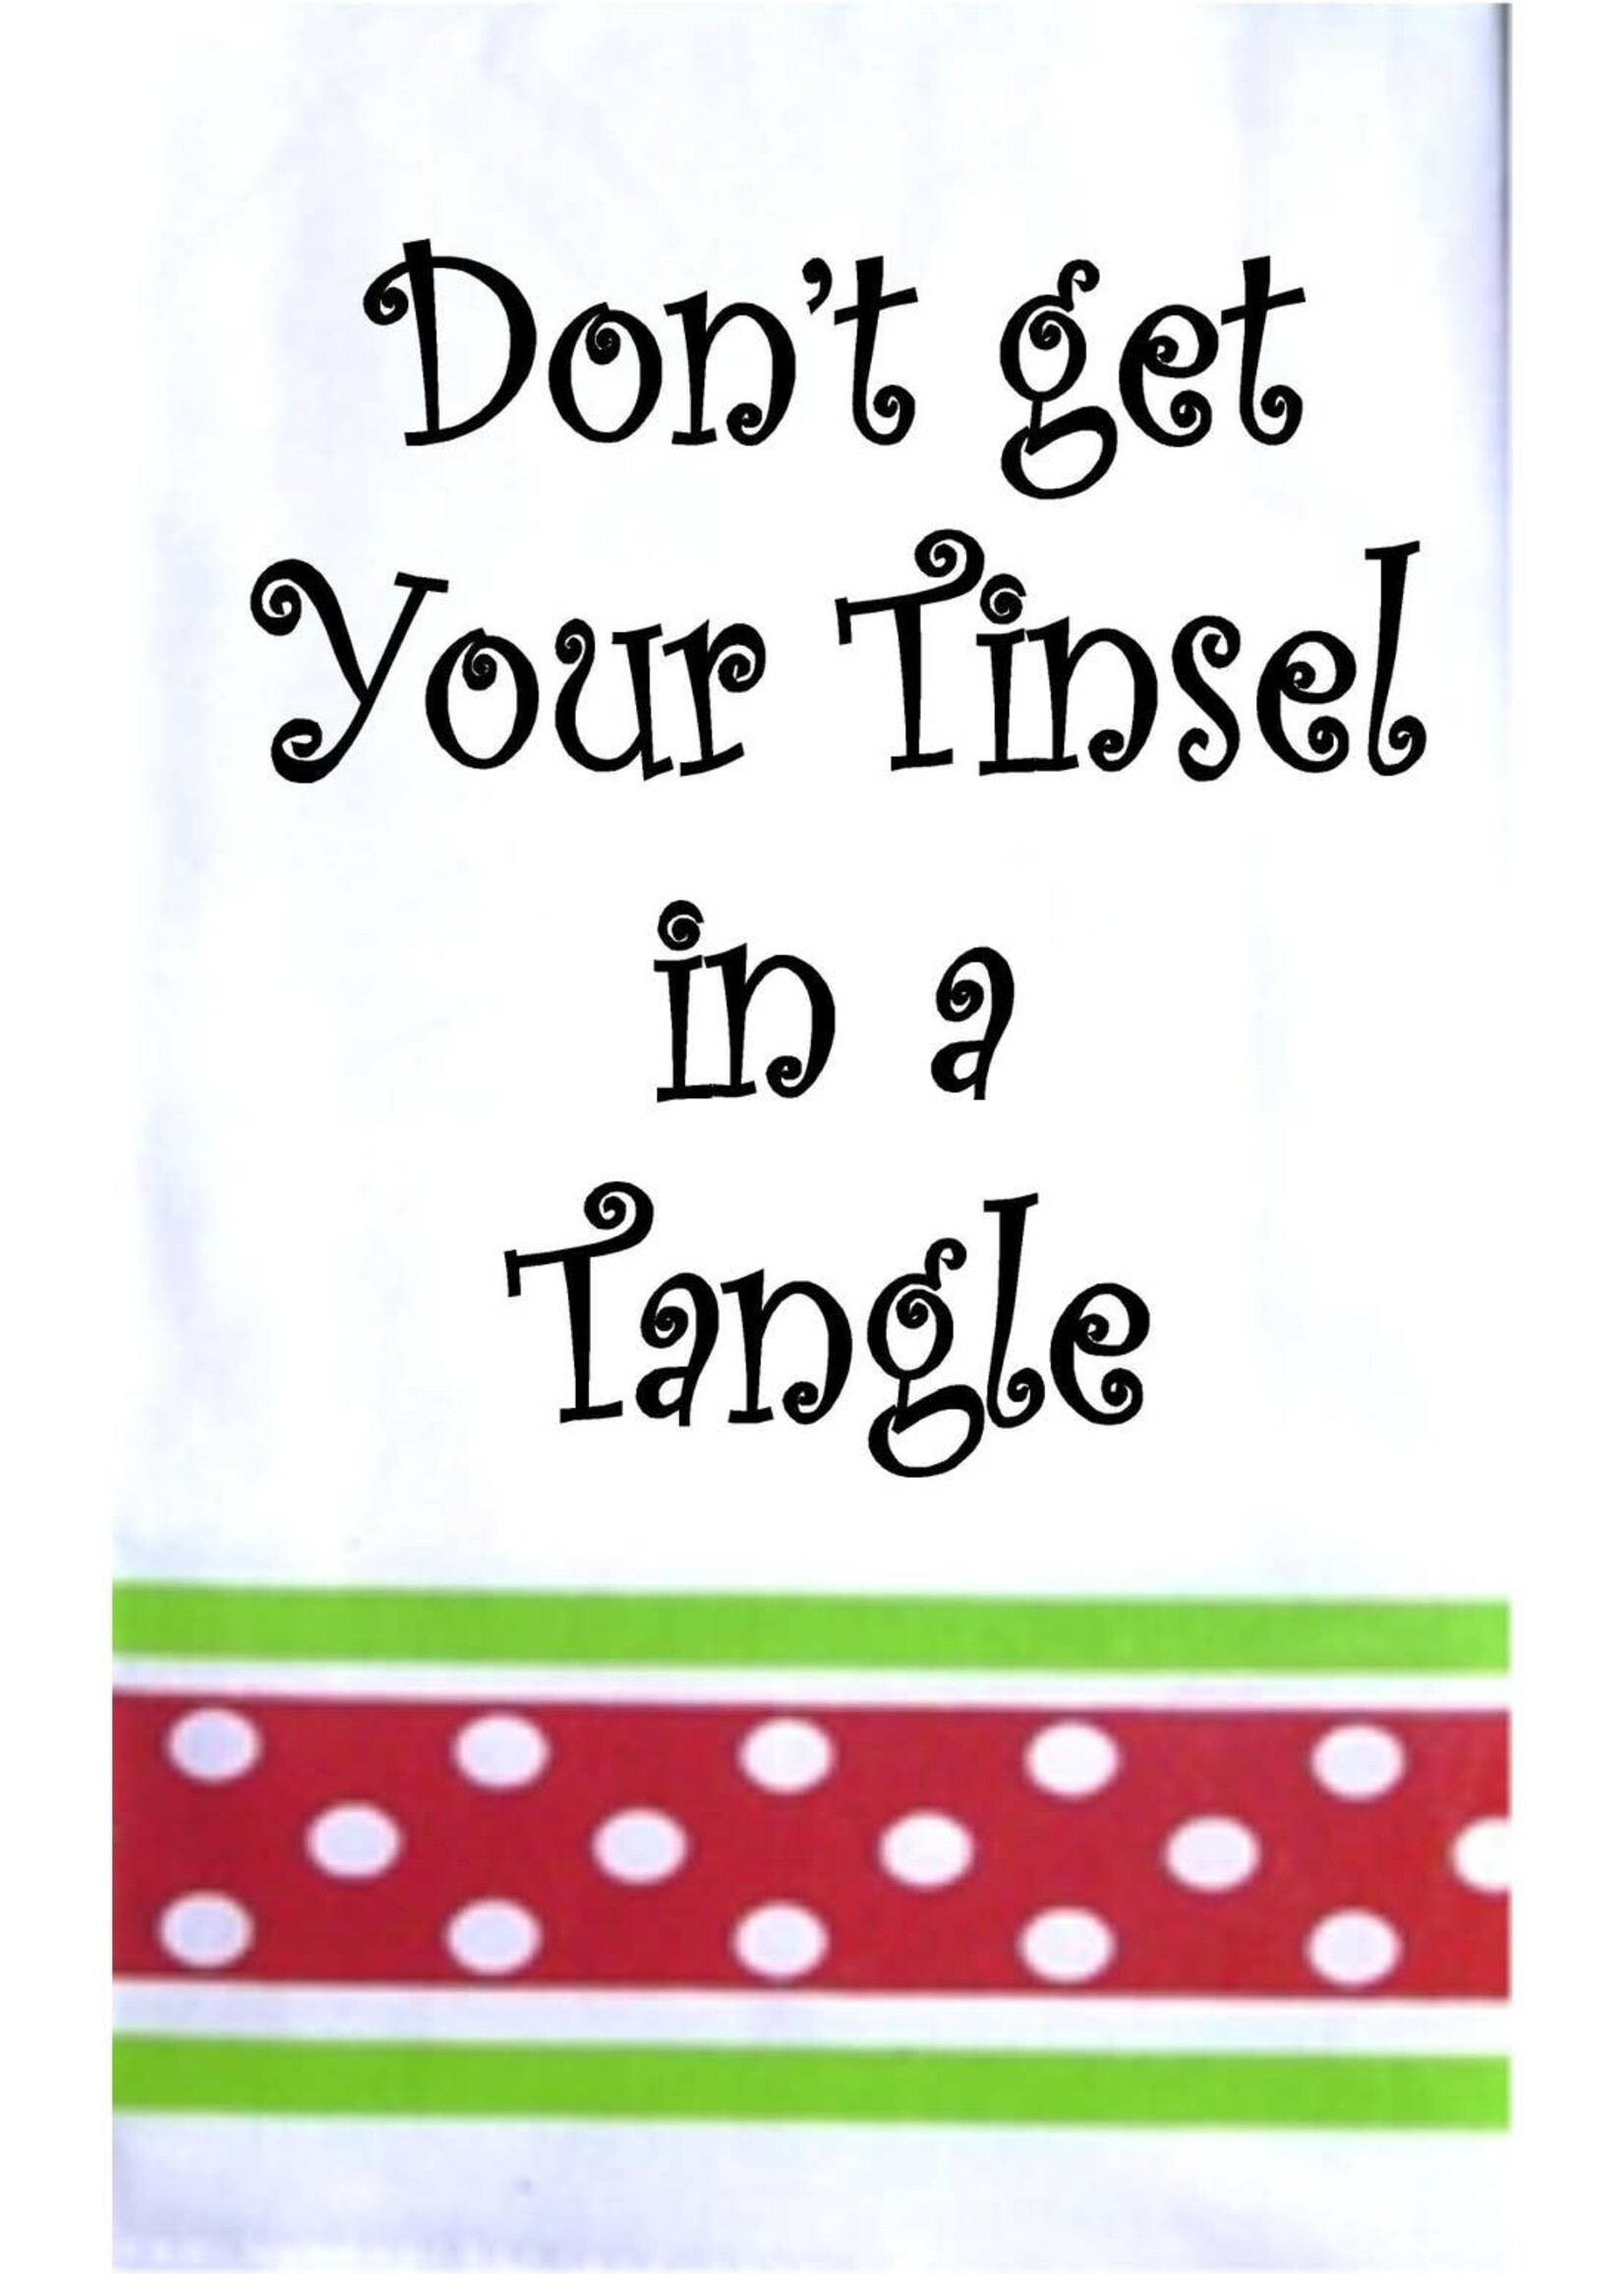 Wild Hare Designs Christmas Towel Don't get your Tinsel in a Tangle